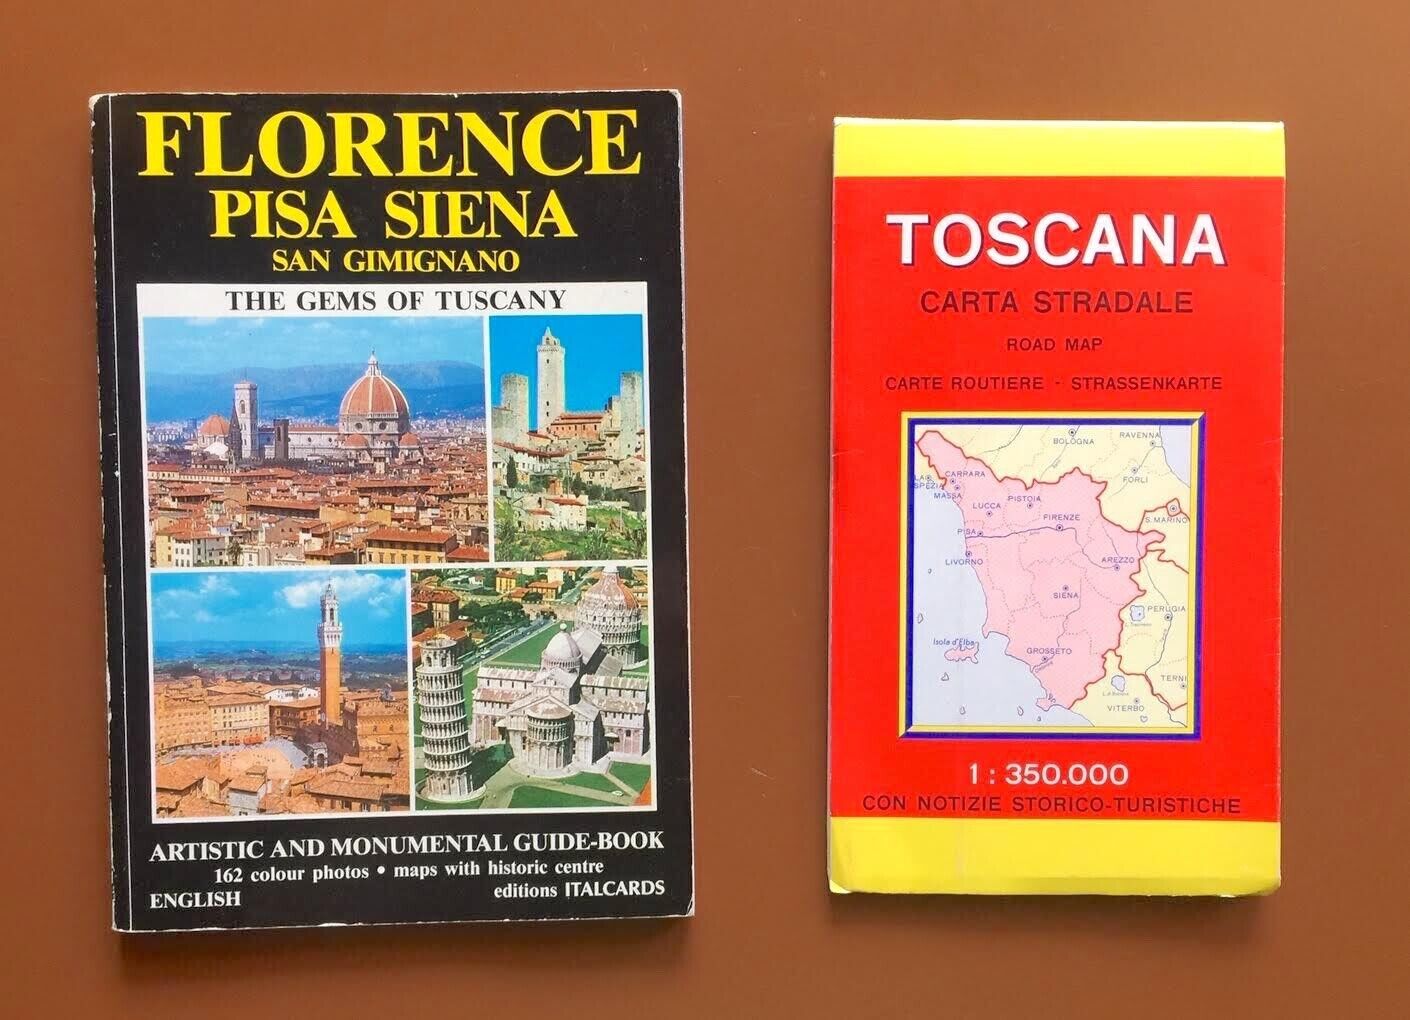 Vintage Map, Guide for Tuscany—Florence, Pisa, Siena 1970’s